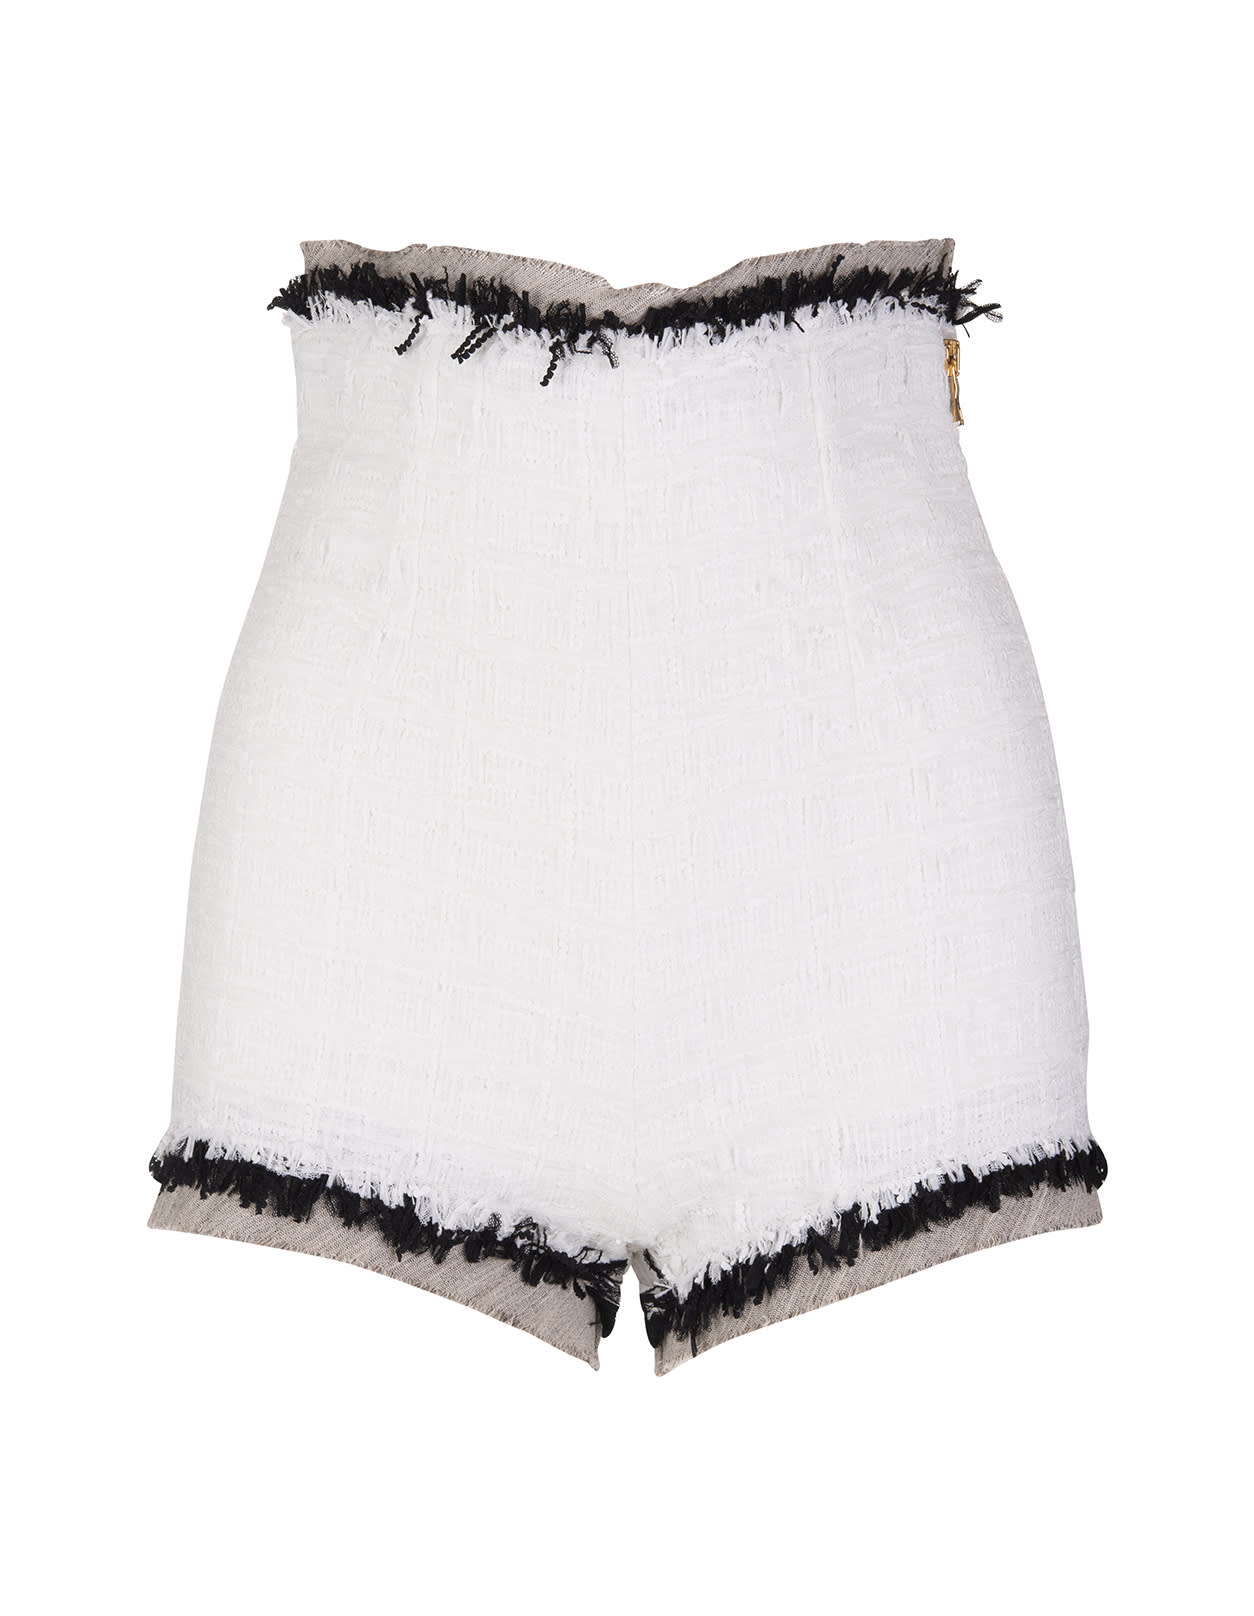 Balmain Woman High Waist Shorts In White Tweed With Contrast Finishes